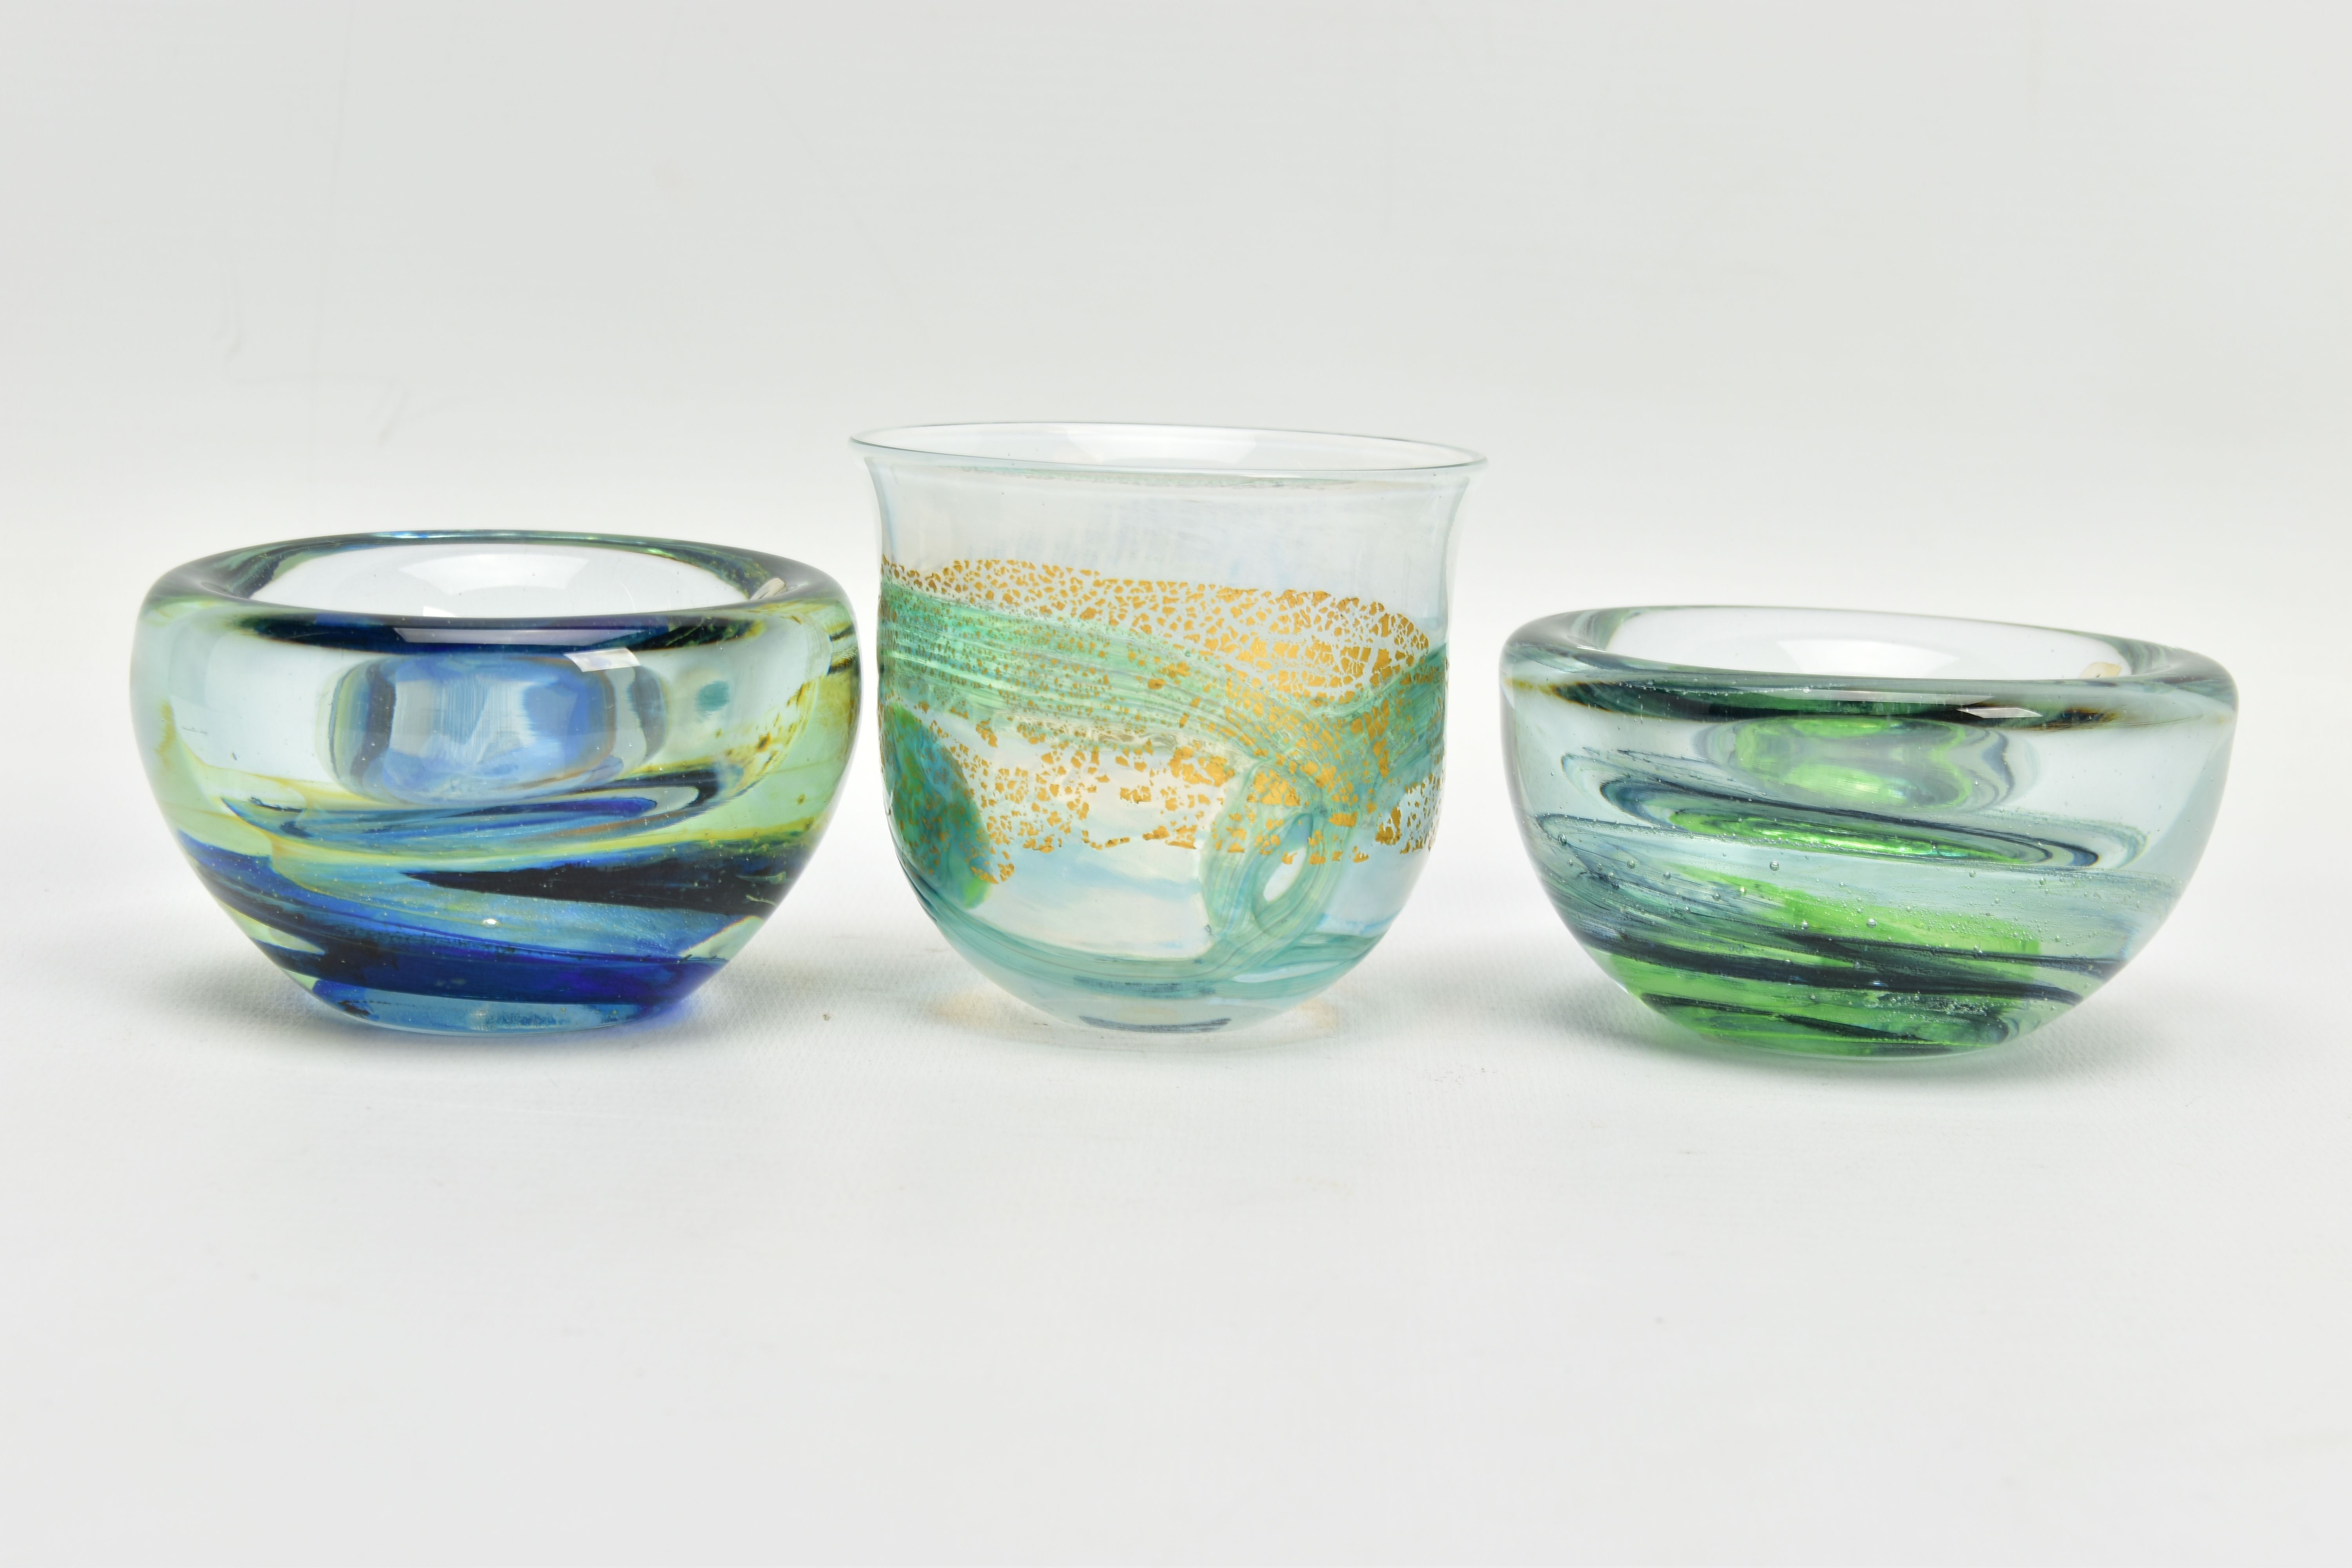 THREE ISLE OF WIGHT STUDIO GLASS BOWLS, the two shorter bowls have impressed marks to the base and - Image 2 of 9